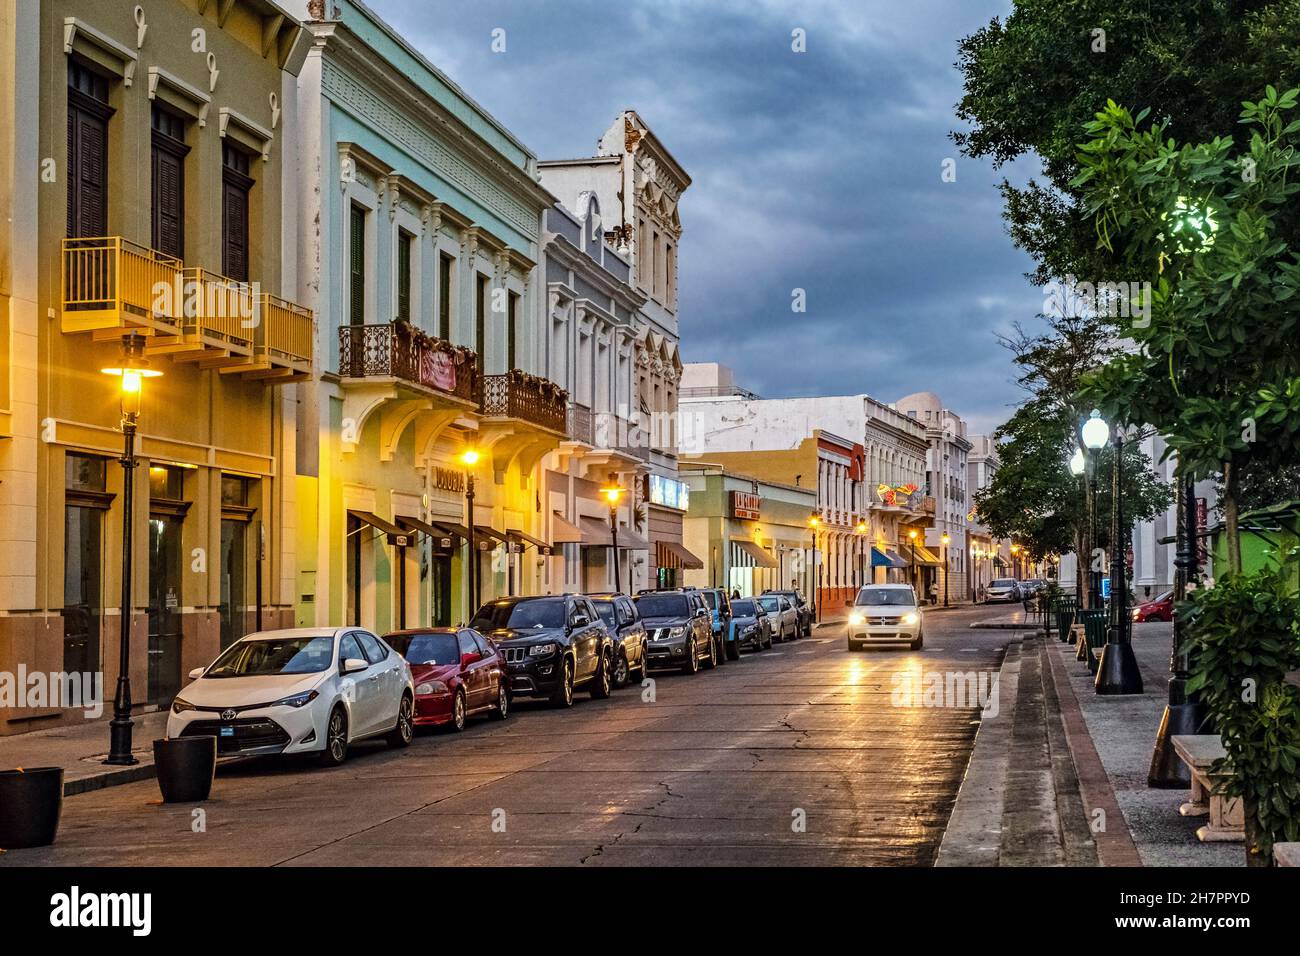 Buildings in Spanish colonial style in the Historic Zone of the city Ponce at night, southern Puerto Rico, Greater Antilles, Caribbean Stock Photo